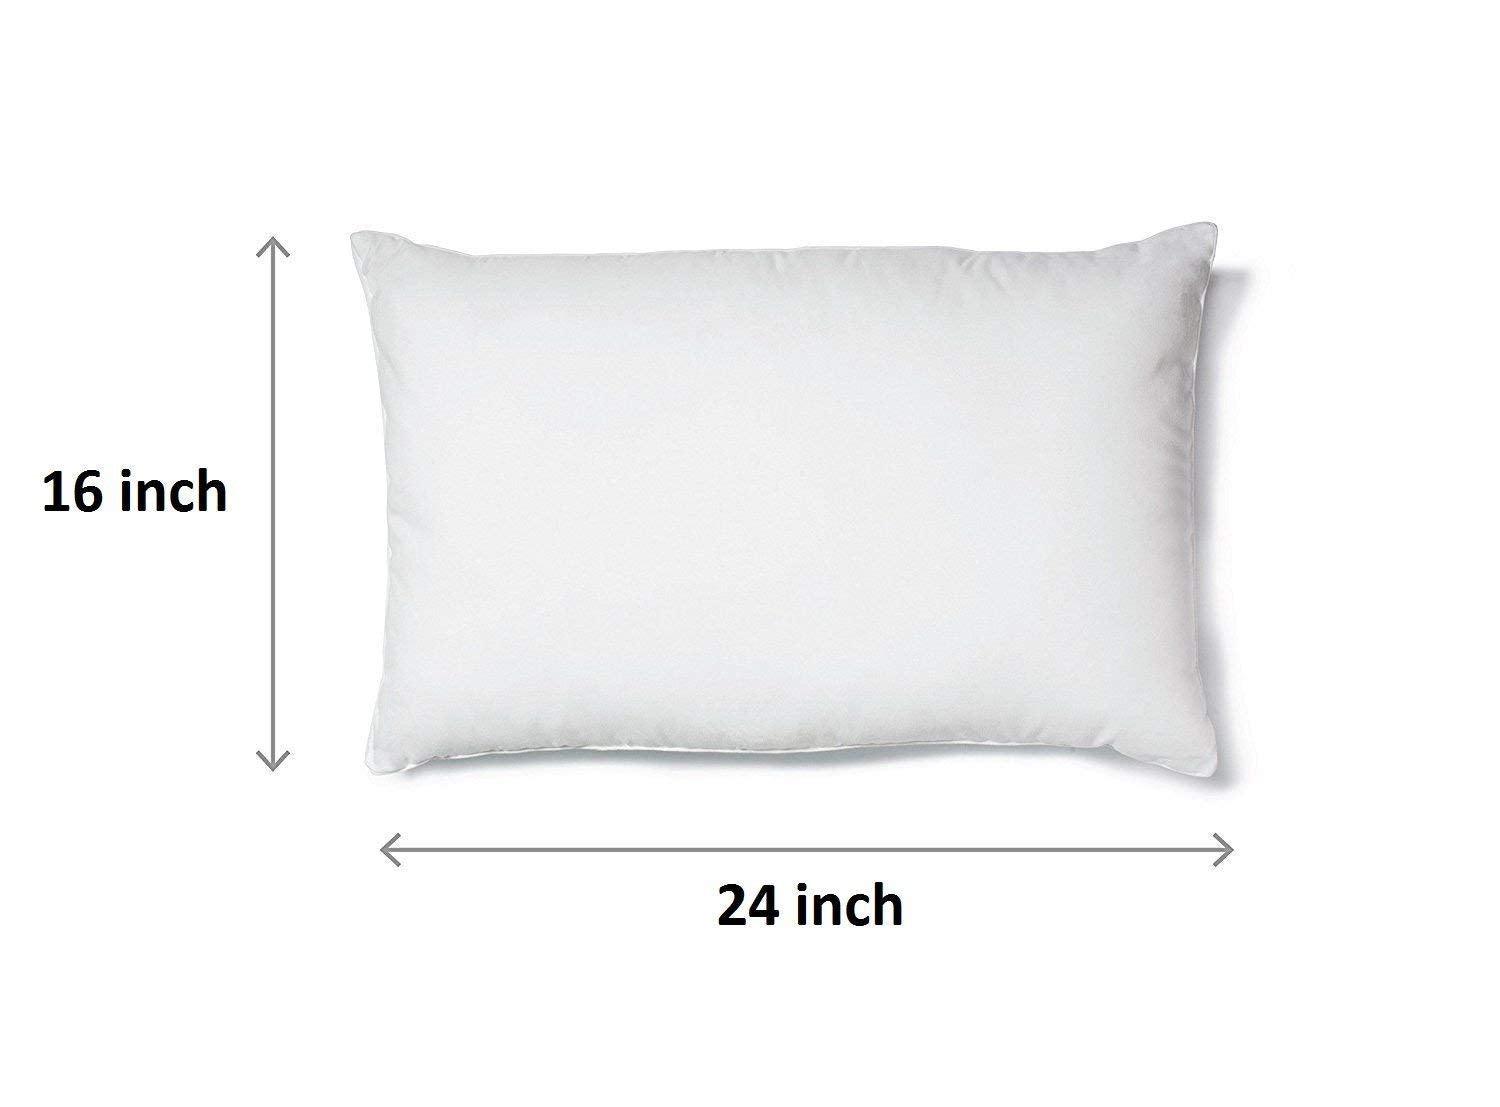 Kuber Industries Microfibre Pillow with Filler (CTKTC022180, White, Standard, 16x24 Inch) - 2 Pieces